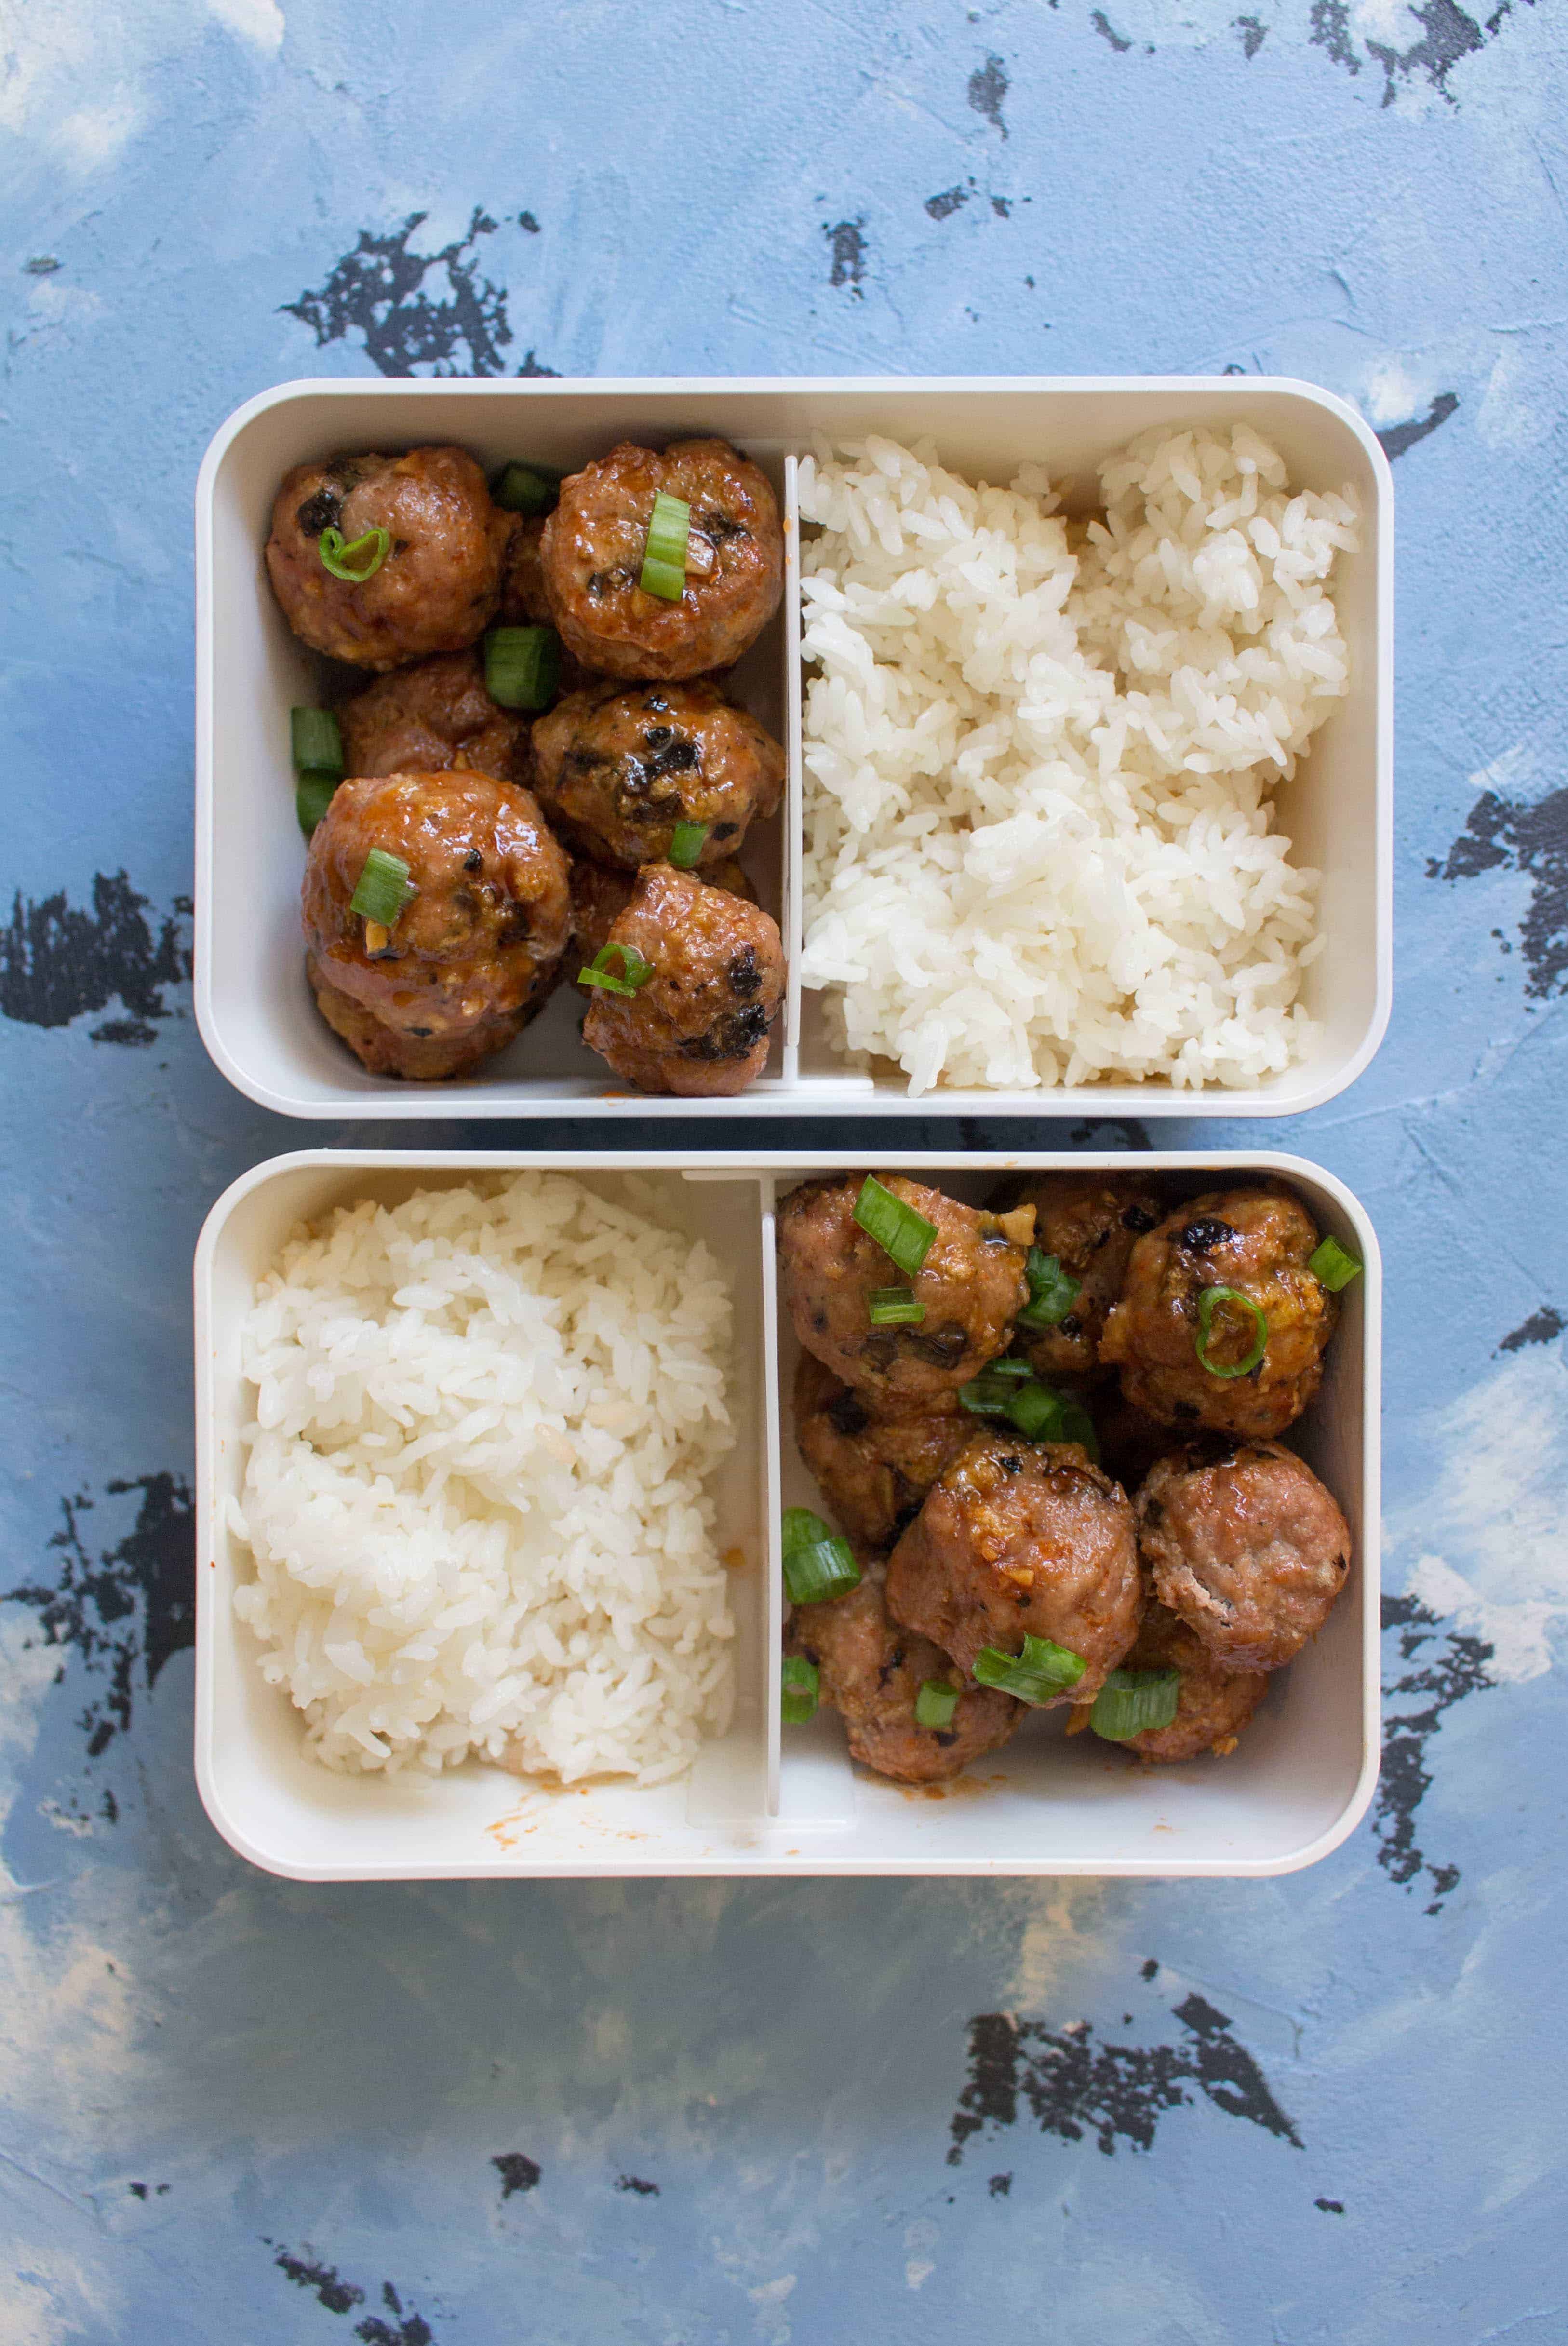 fast healthy meal prep | These Honey Sriracha Turkey and Mushroom Meatballs are the perfect blend of sweet and spicy that leaves you wanting more. These are perfect as an appetizer or as part of your weekly meal prep.